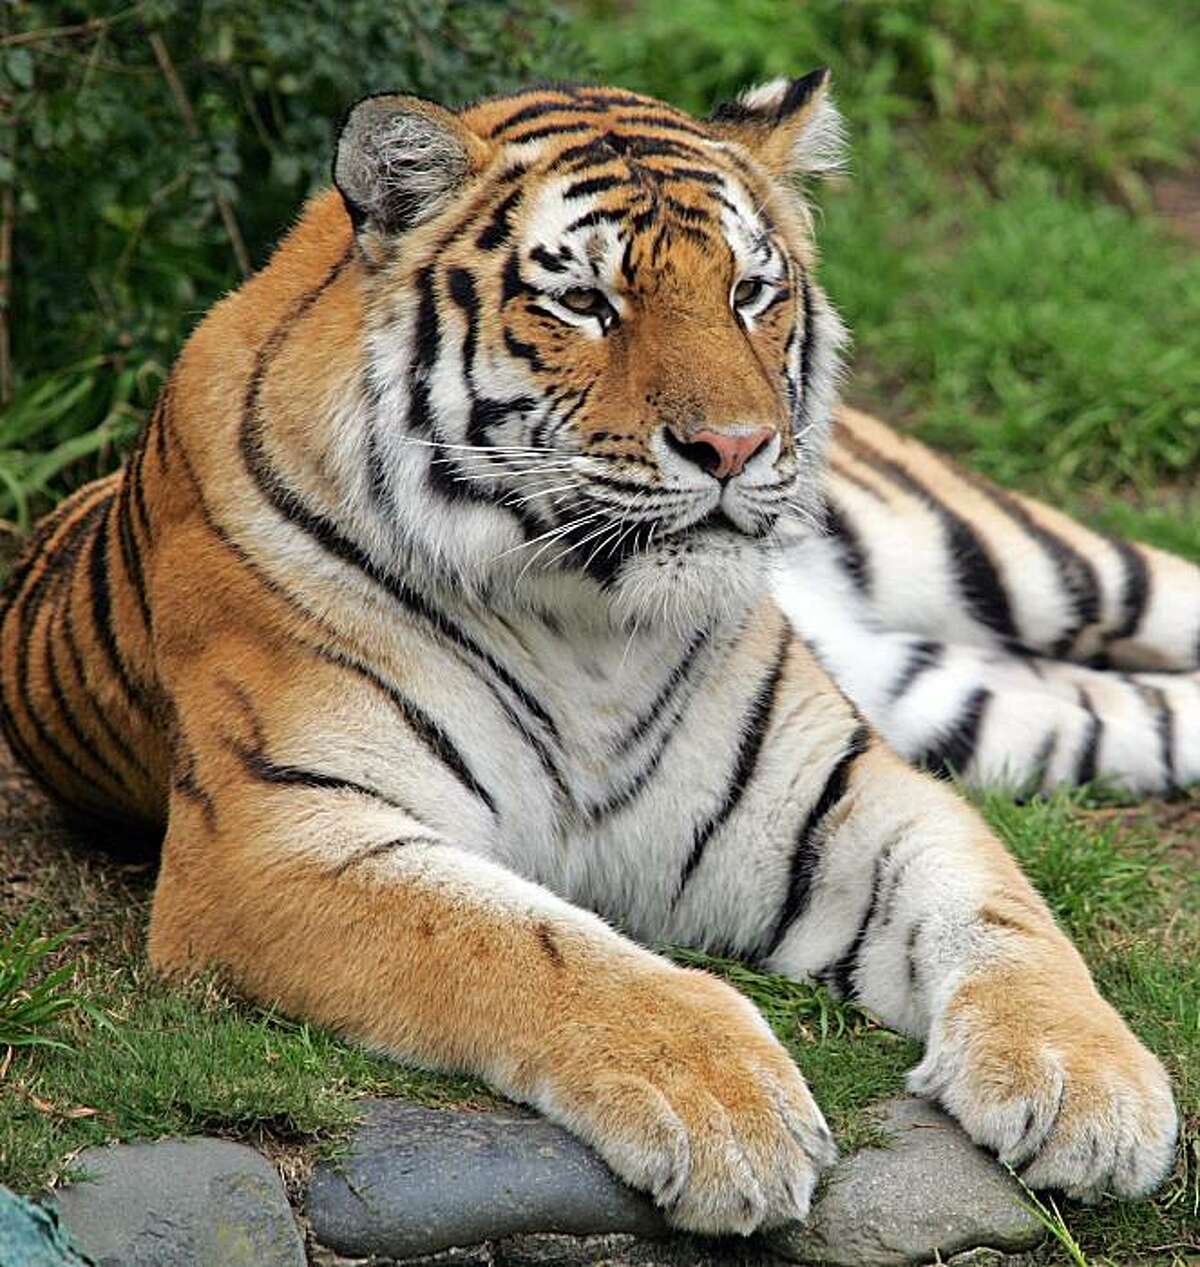 * FILE ** This undated file photo provided by the San Francisco Zoo shows Tatiana, a female Siberian tiger. Tatiana, the tiger that mauled a zookeeper last year escaped from its pen at the San Francisco Zoo on Tuesday Dec. 25, 2007, killing one man and injuring two others before police shot it dead, authorities said. (AP Photo/San Francisco Zoo, File)